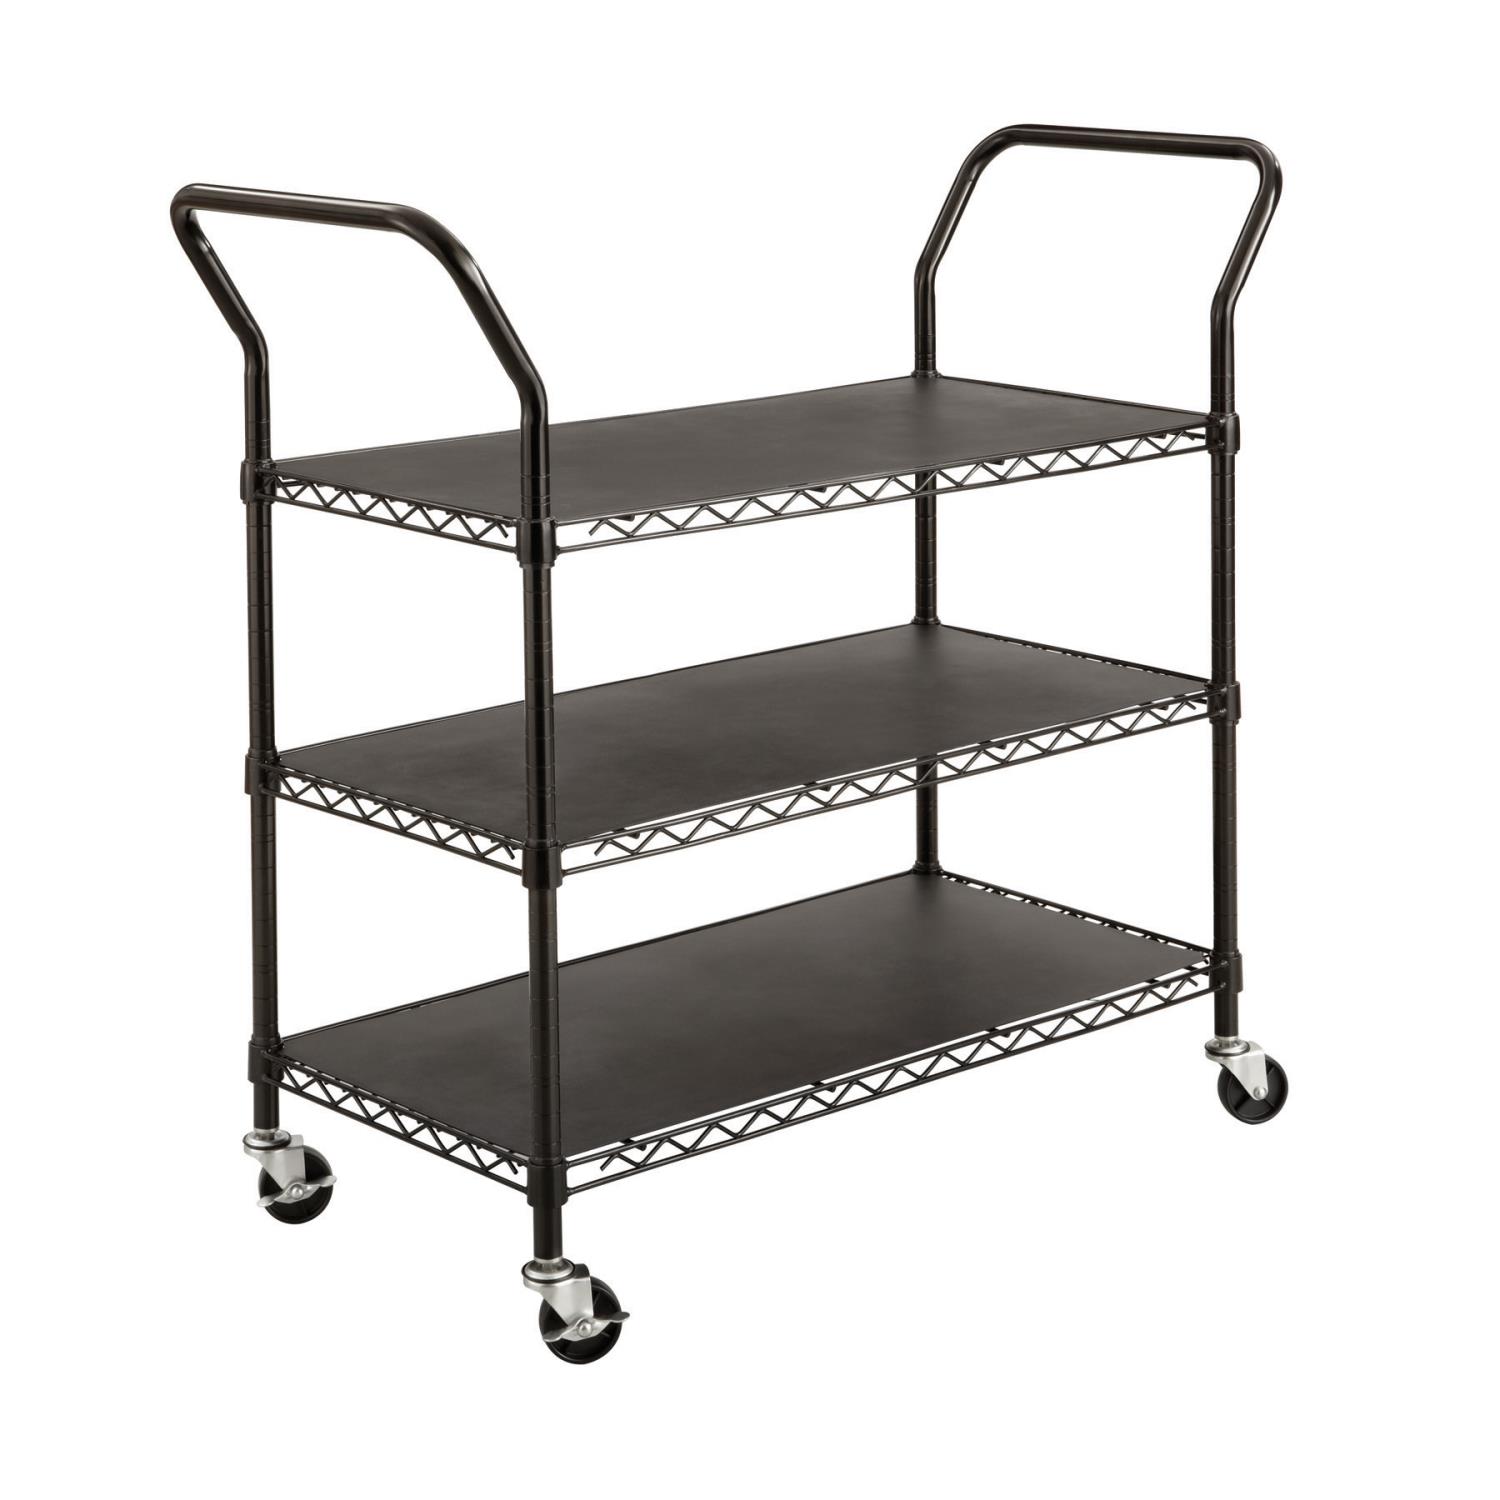 Safco Products Safco Wire Utility Cart With 3 Shelves In Black Finish 5338BL